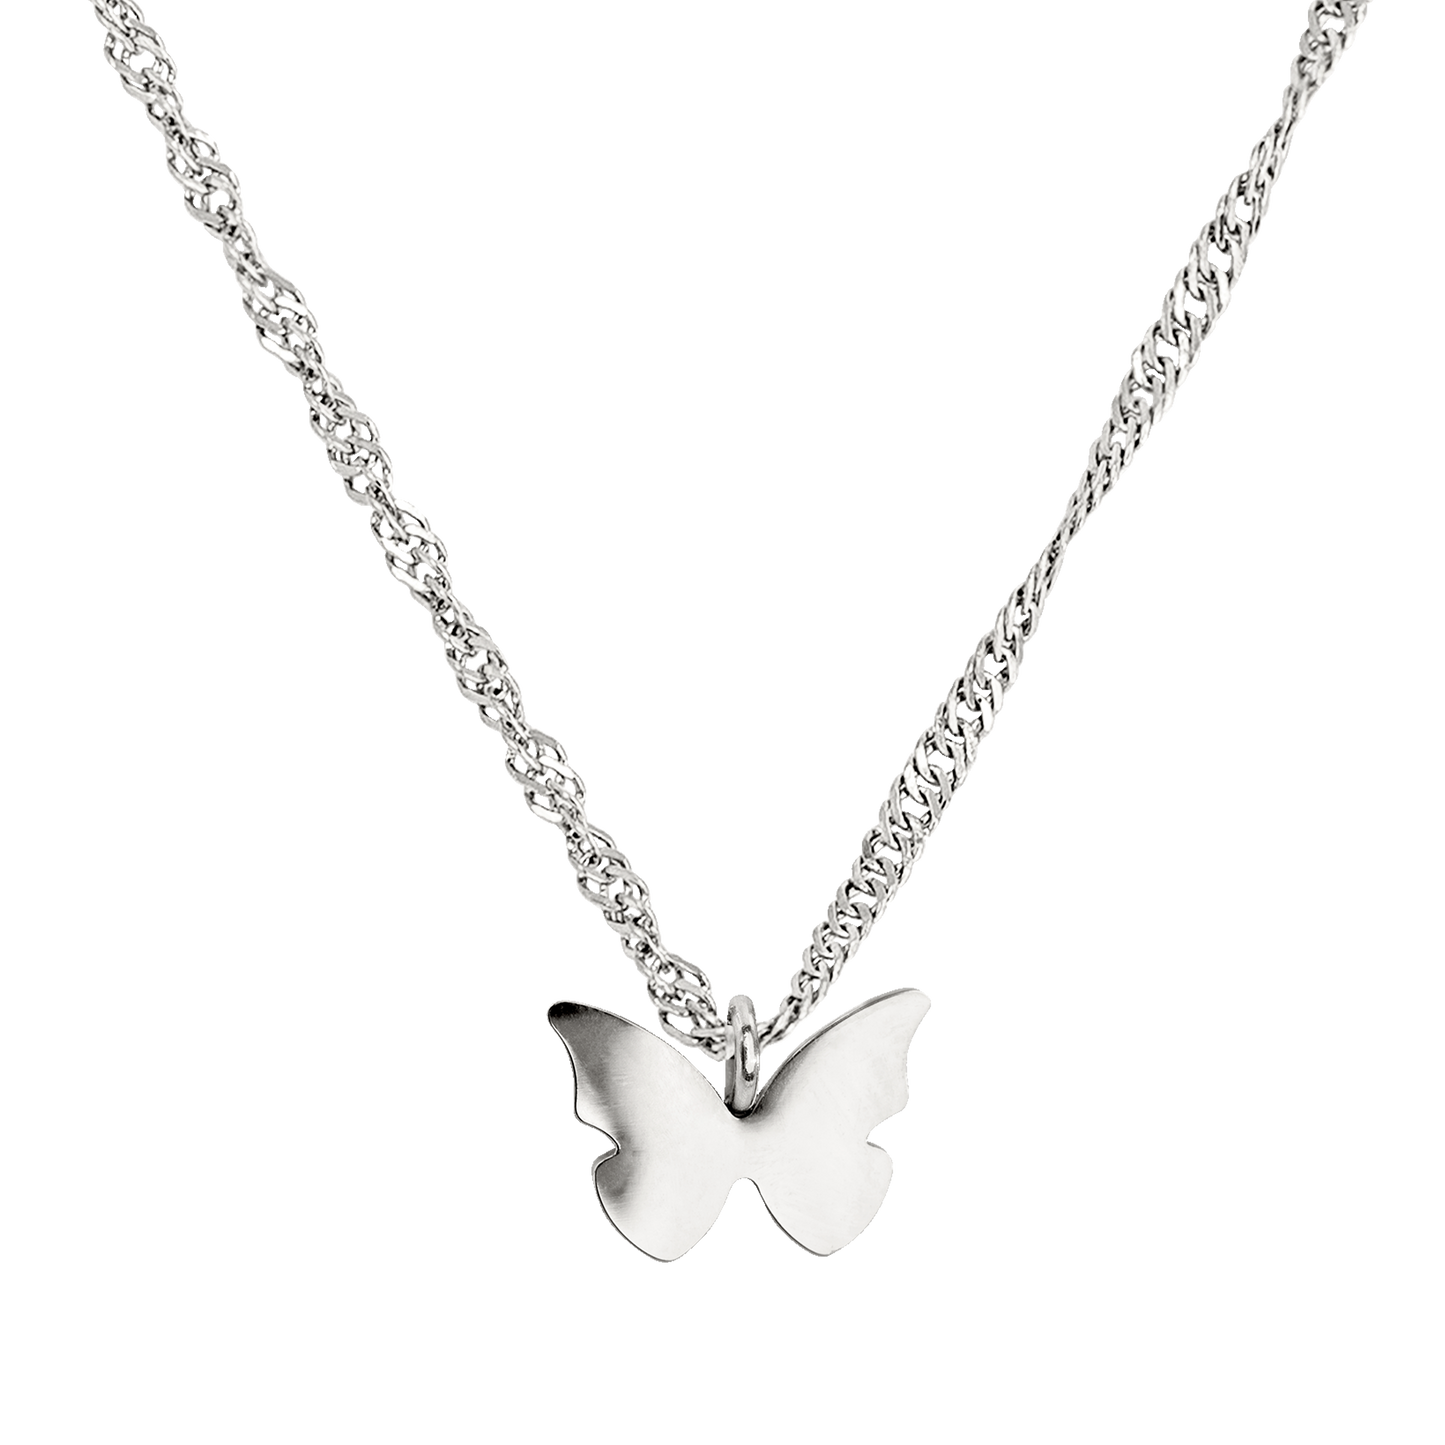 Flutterby Collana Argento